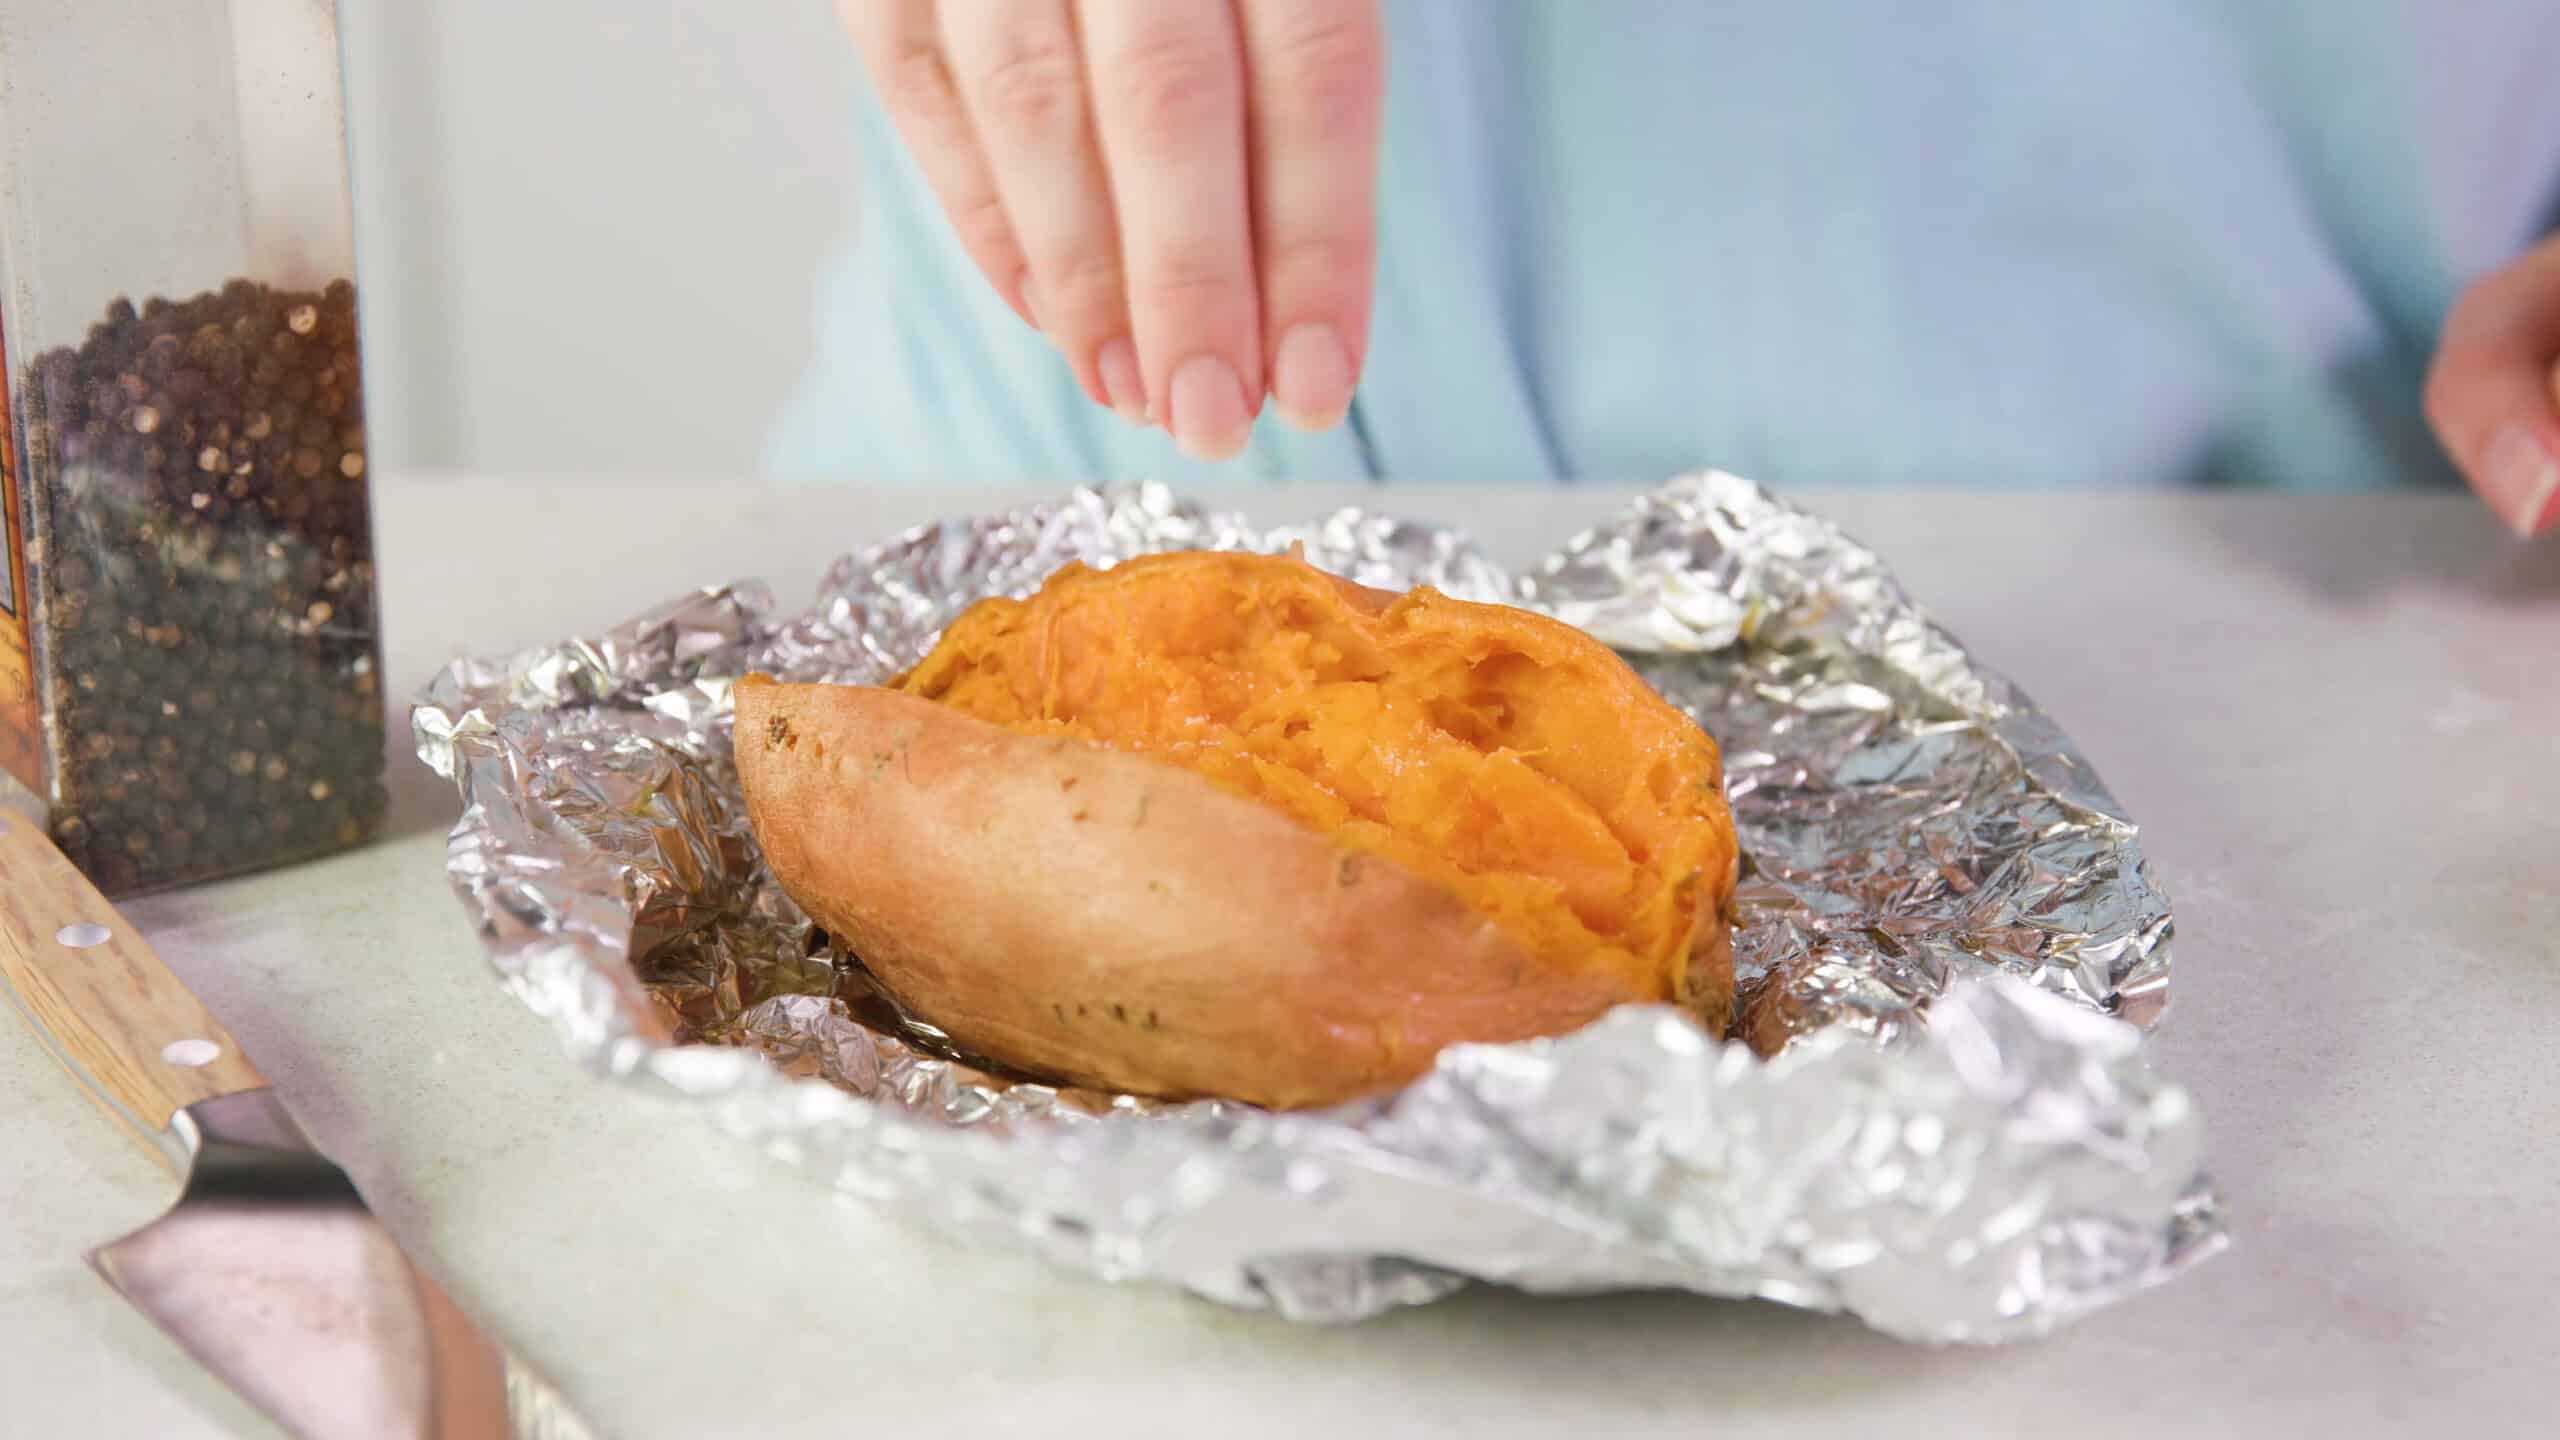 Angled view of open and smashed baked sweet potato on unwrapped aluminum foil with a hand delivering a pinch of salt to the interior of the potato.